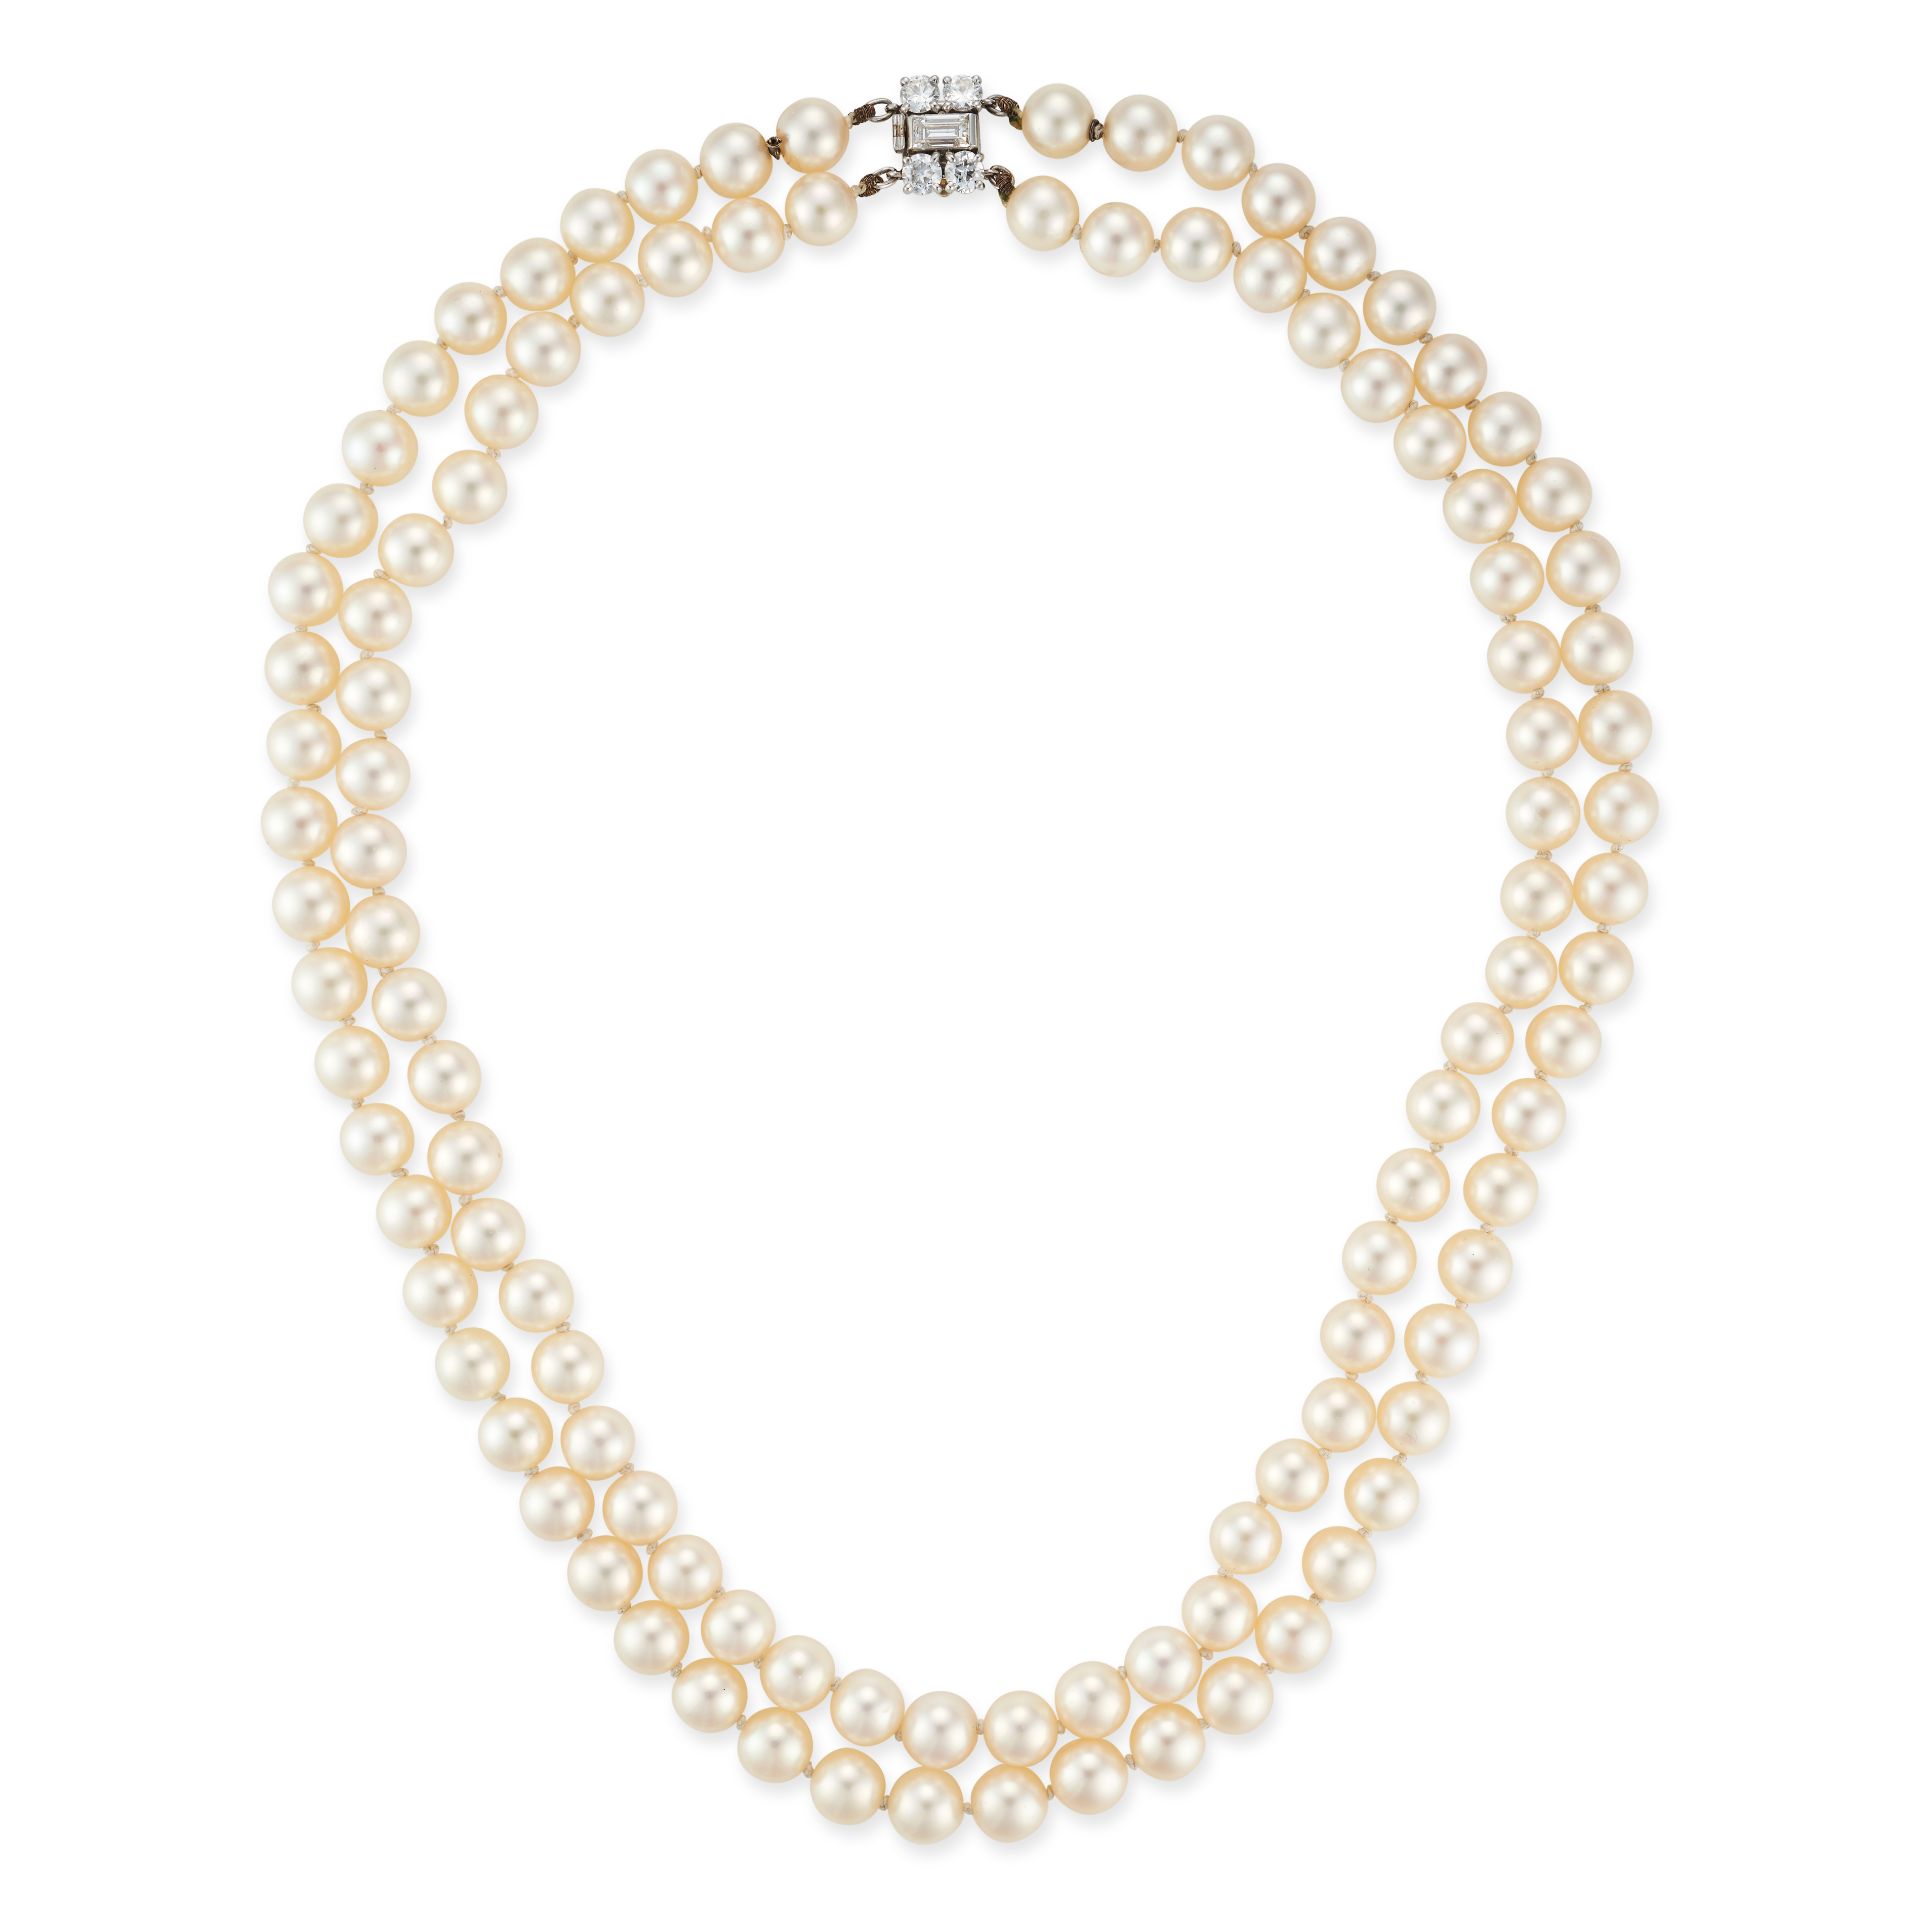 A TWO ROW PEARL NECKLACE WITH A VAN CLEEF & ARPELS DIAMOND CLASP in platinum and 18ct gold, compr...